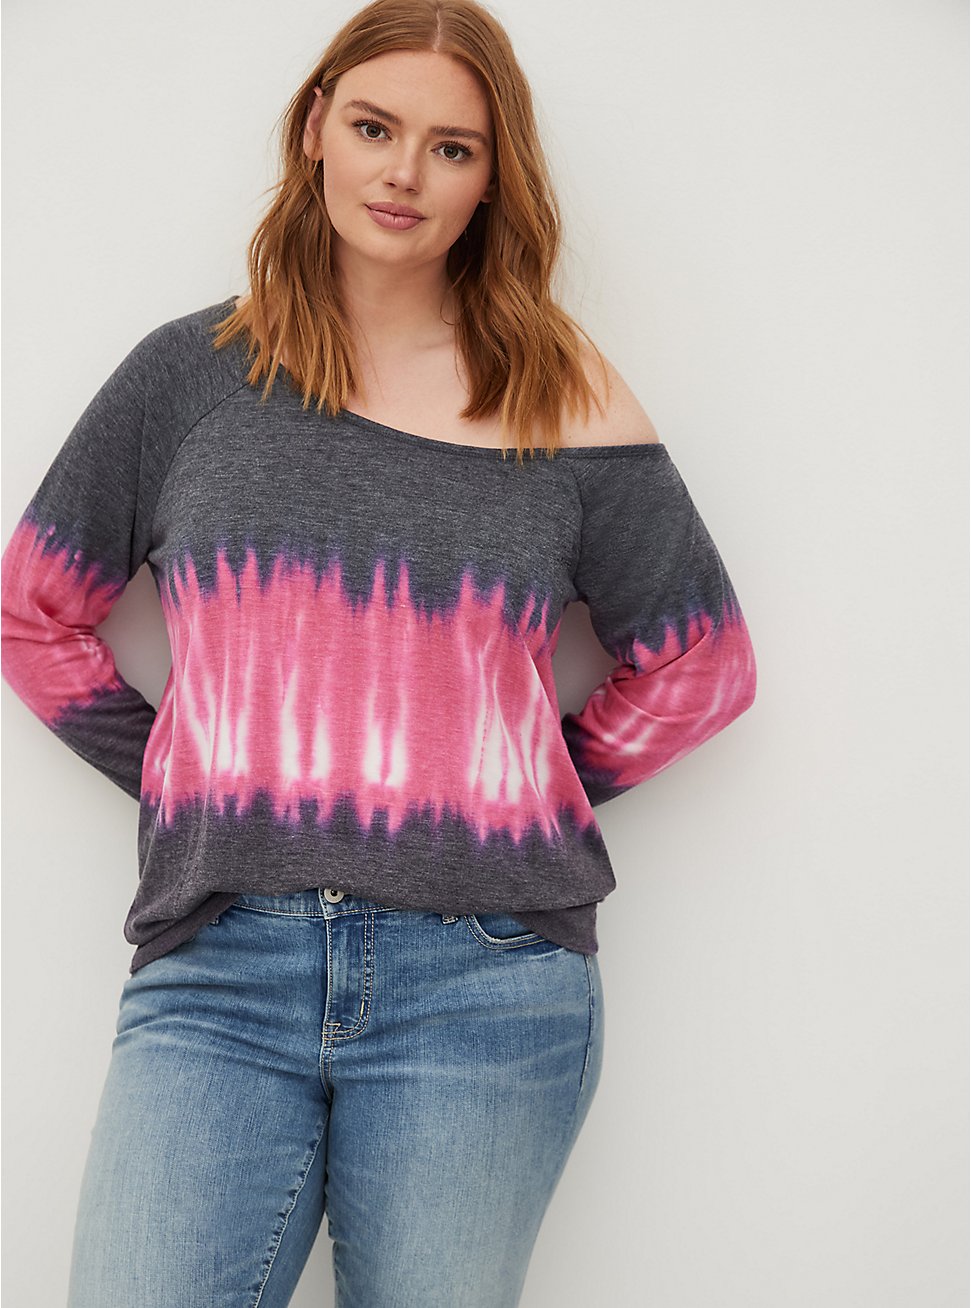 Plus Size Off Shoulder Sweatshirt - Lightweight French Terry Tie Dye Navy & Pink, OTHER PRINTS, hi-res